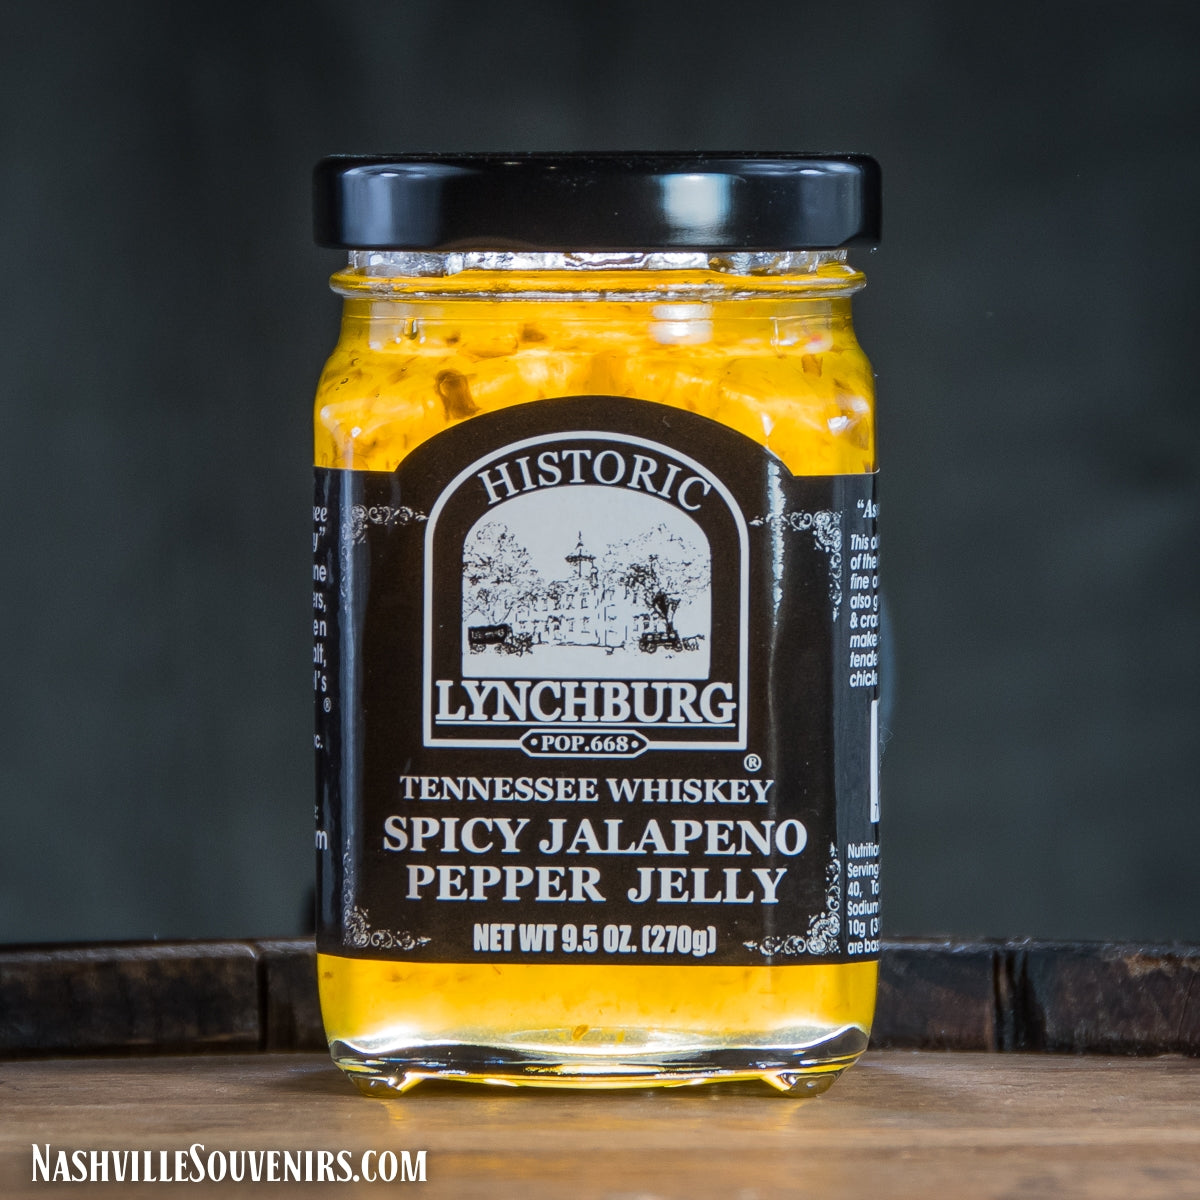 Taste this great Historic Lynchburg Jalapeno Pepper Jelly features that great taste of Jack Daniels Whiskey - yummy! FREE SHIPPING on all US orders over $75!